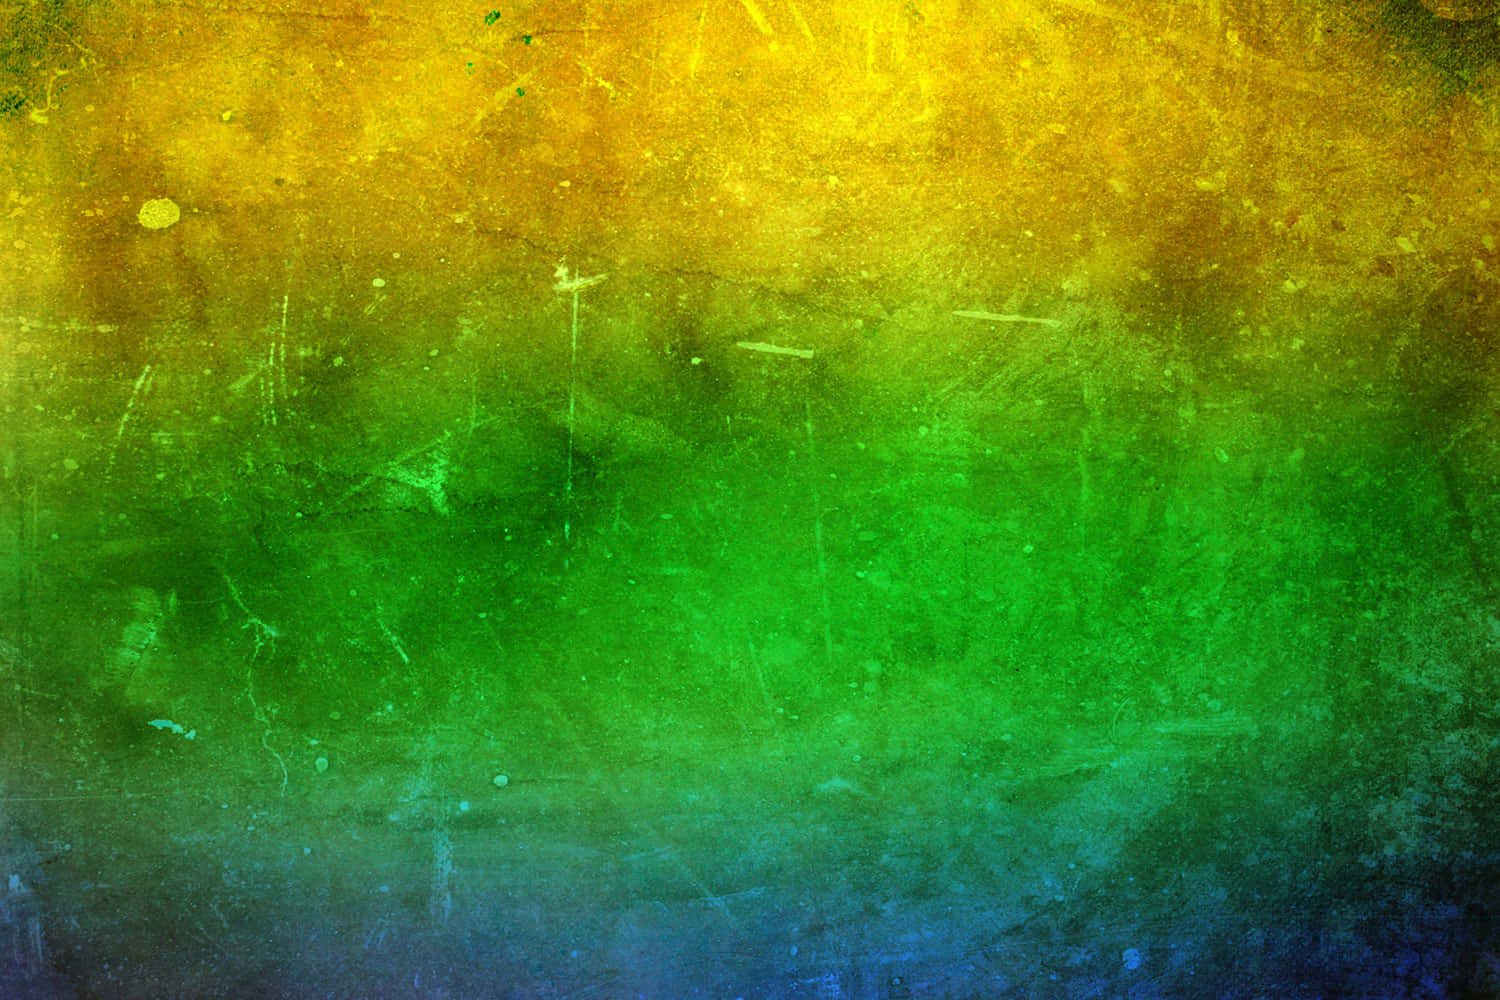 Brightly colored background featuring shades of green and yellow